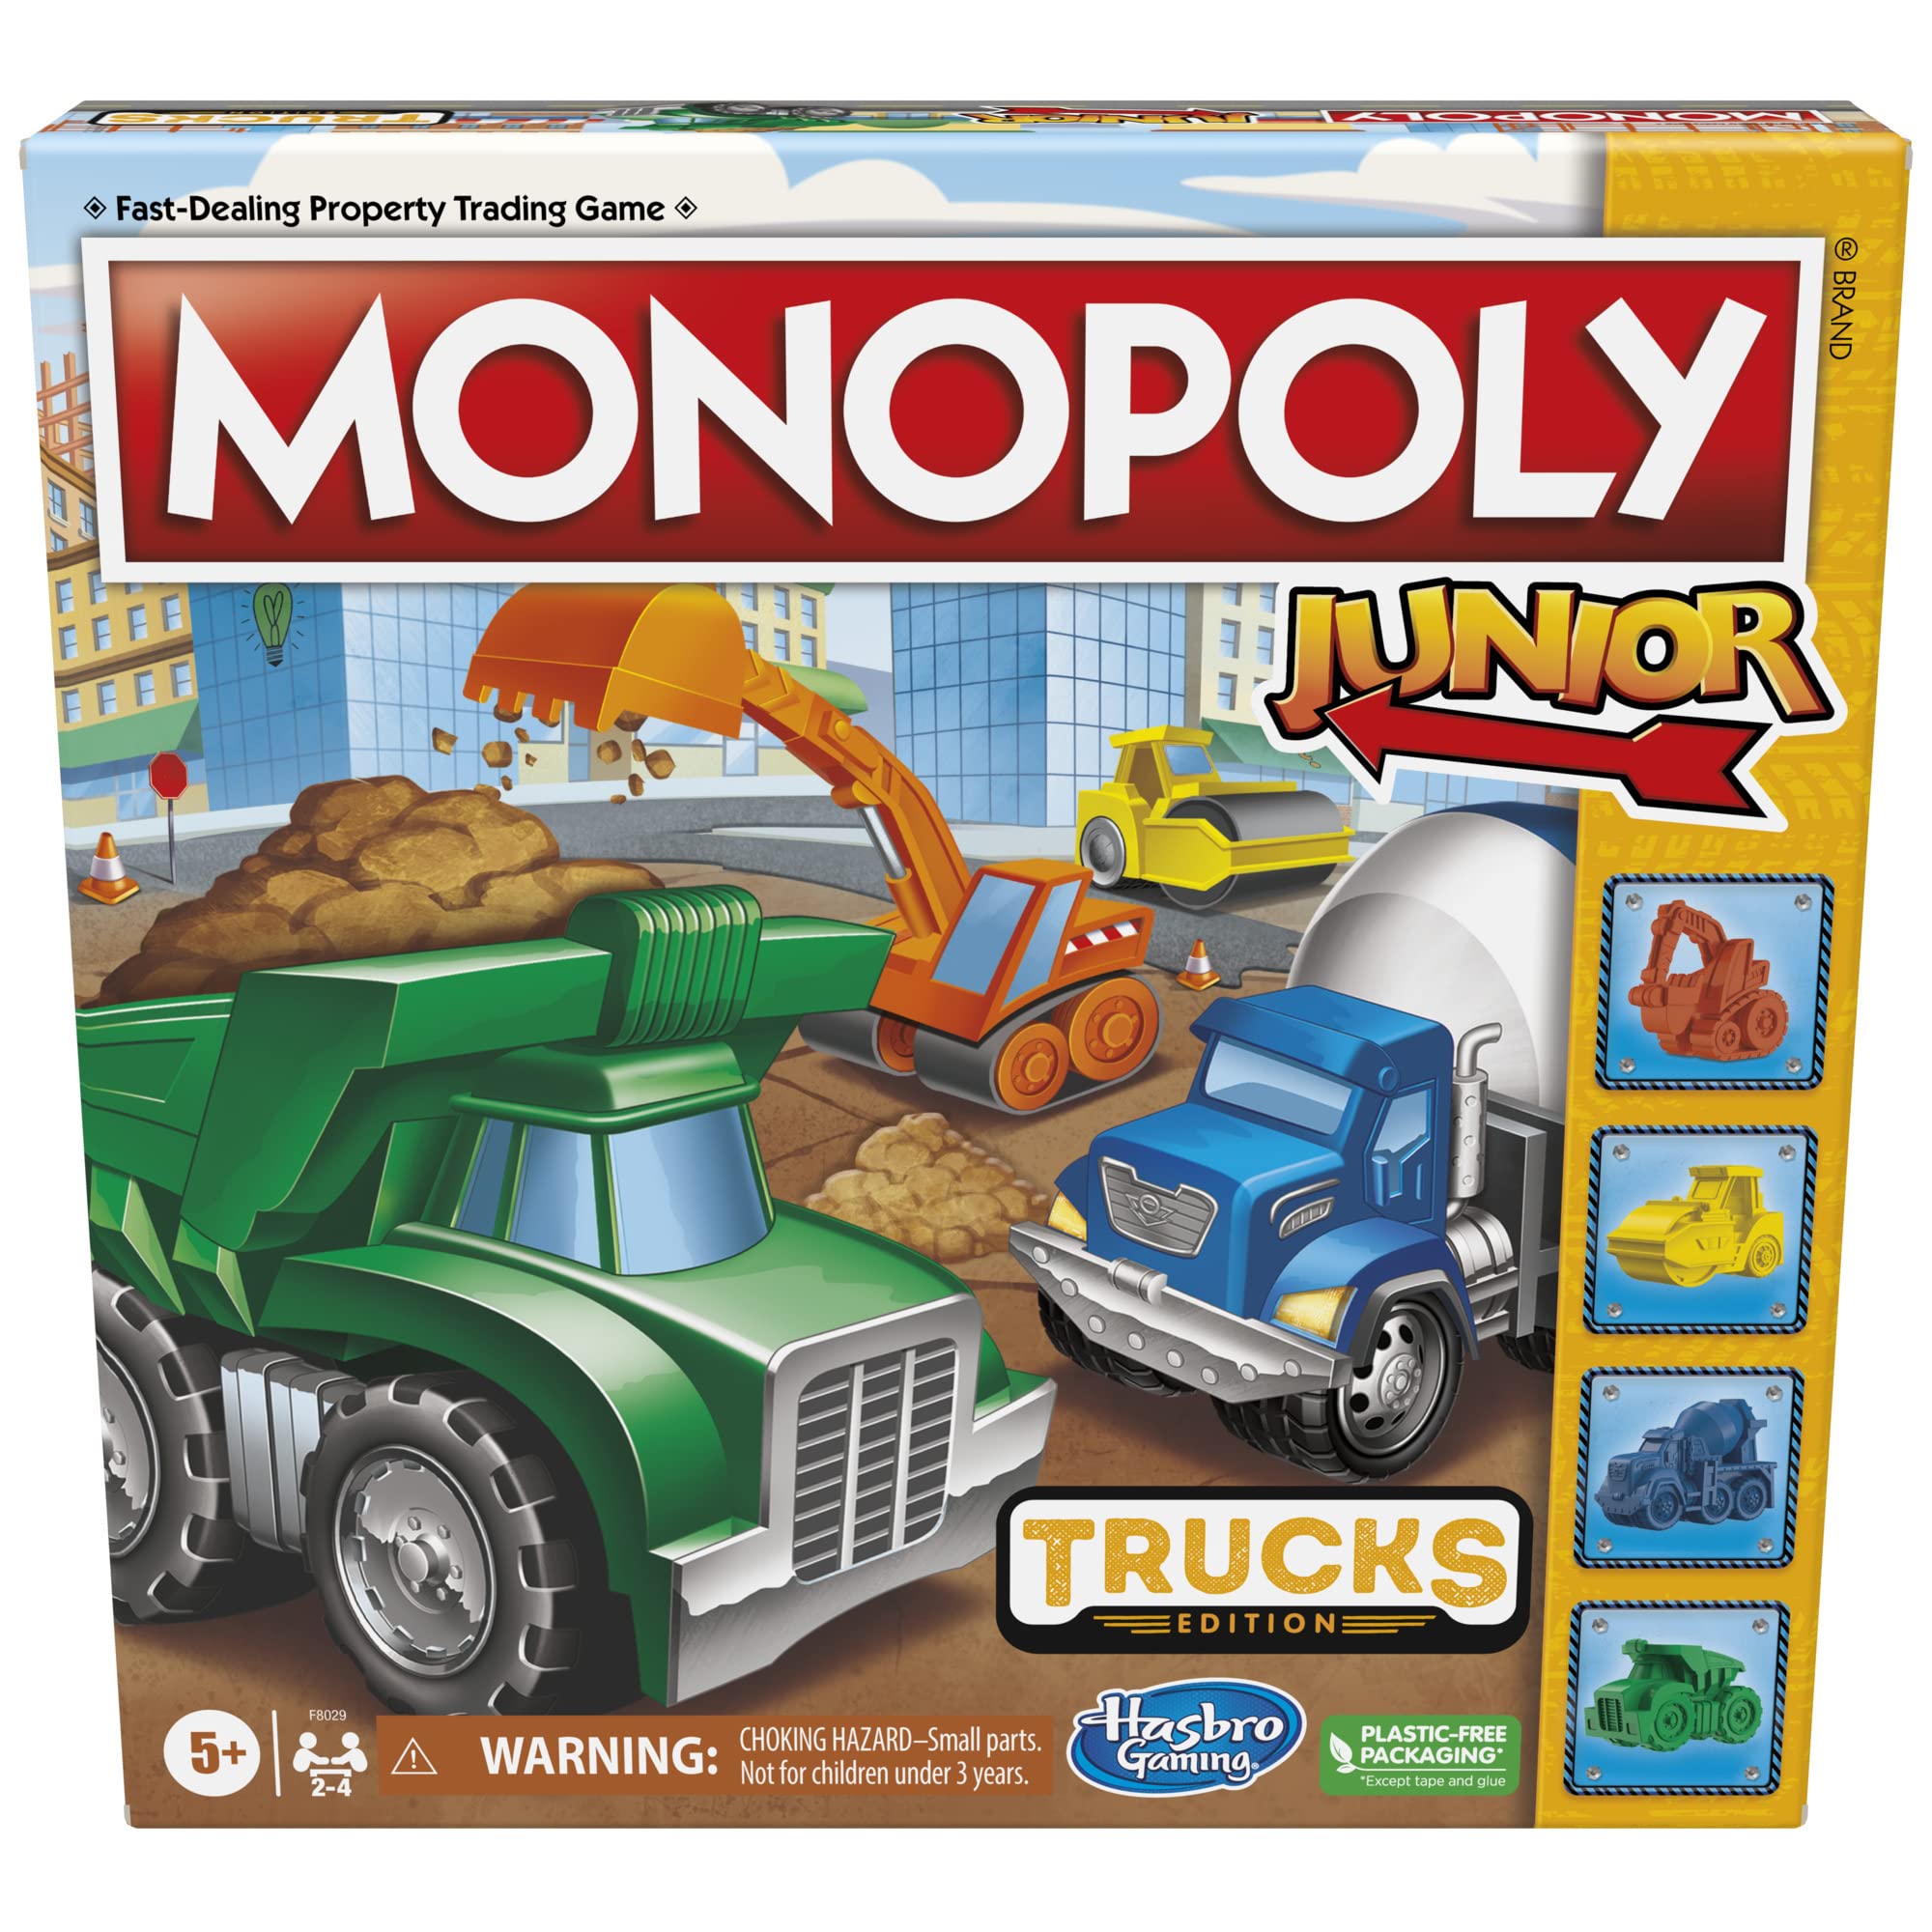 Hasbro Gaming Monopoly Junior: Trucks Edition Board Game, Monopoly Game for Kids Ages 5+, Kids Board Games for 2-4 Players, Kids Games, Kids Gifts (Amazon Exclusive)